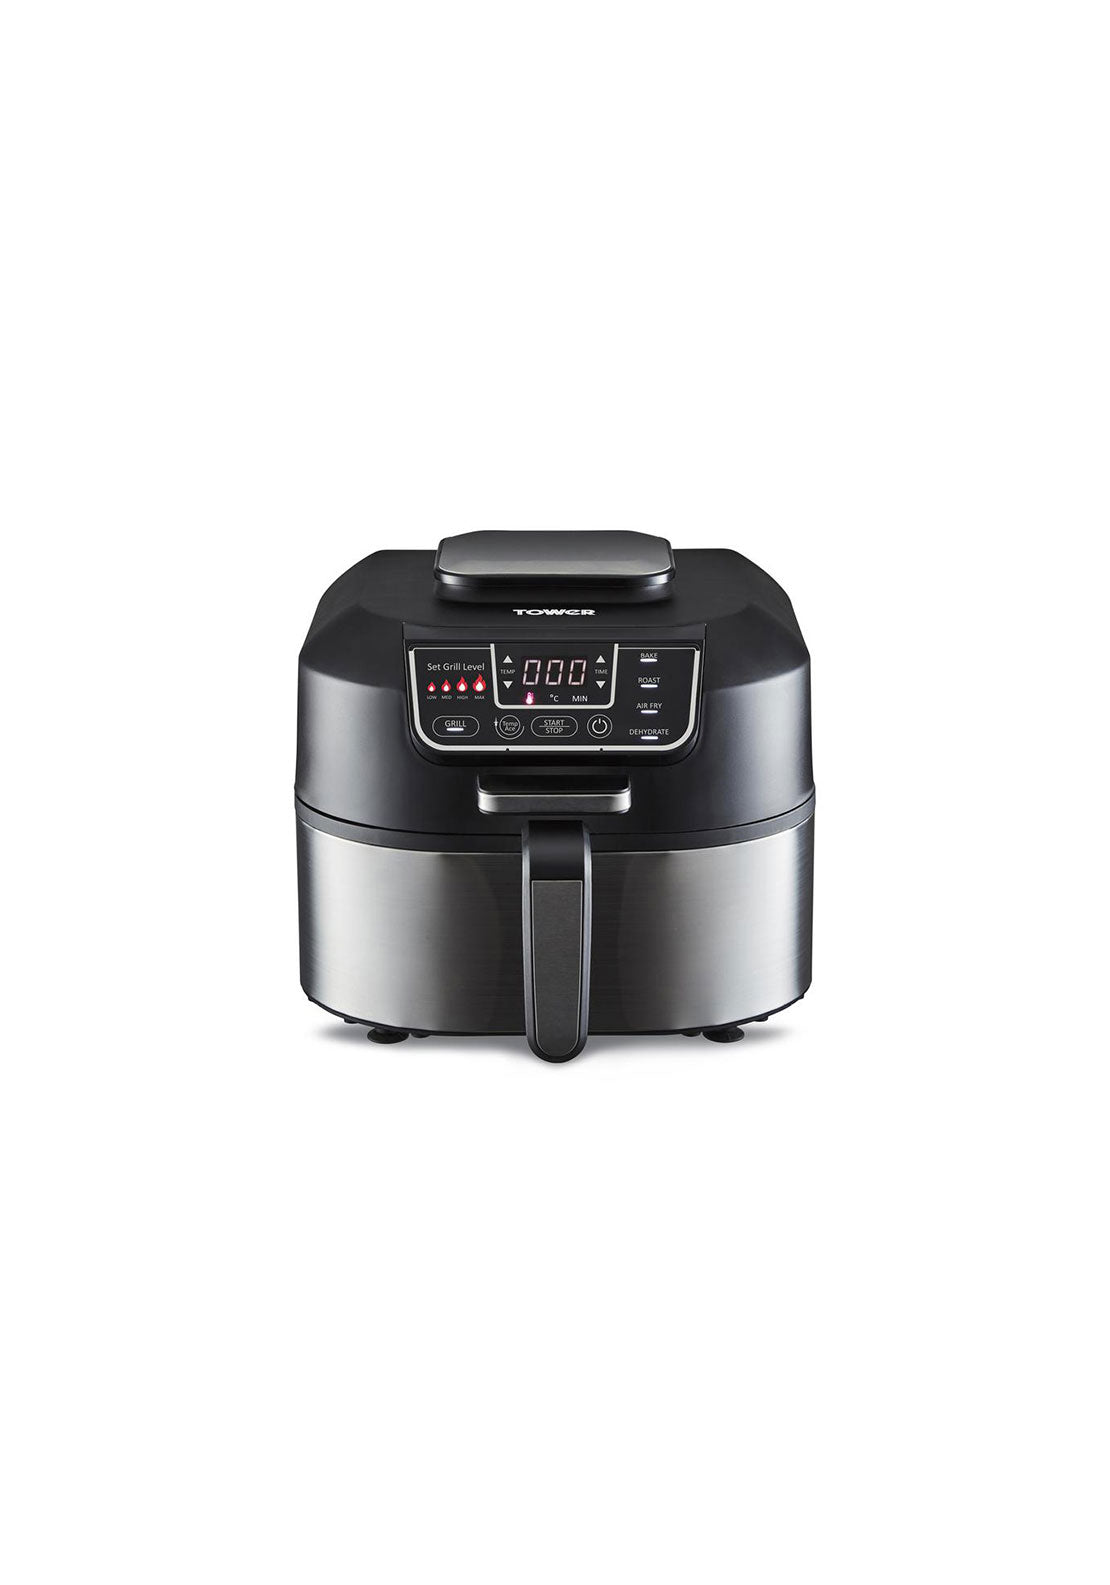 Tower 5.6L 5 In 1 Vortx 5.6L Air Fryer and Grill with Crisper | T17086 1 Shaws Department Stores